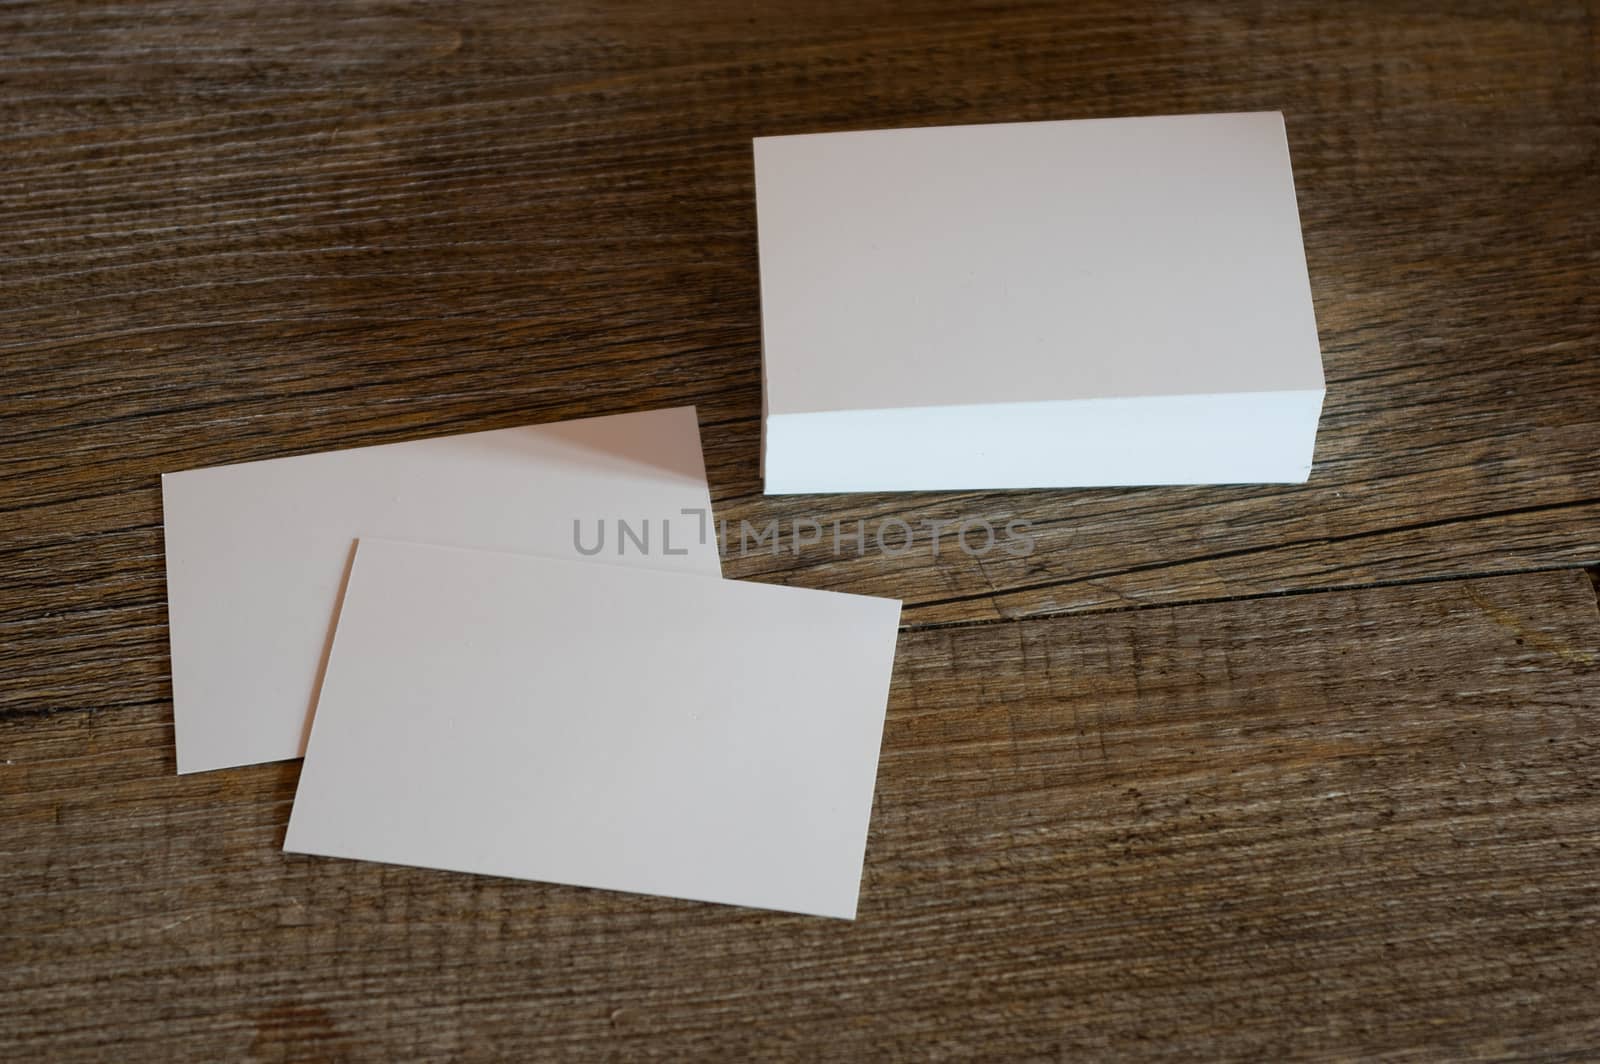 blank business card templates on wooden surface by MarcoWarm